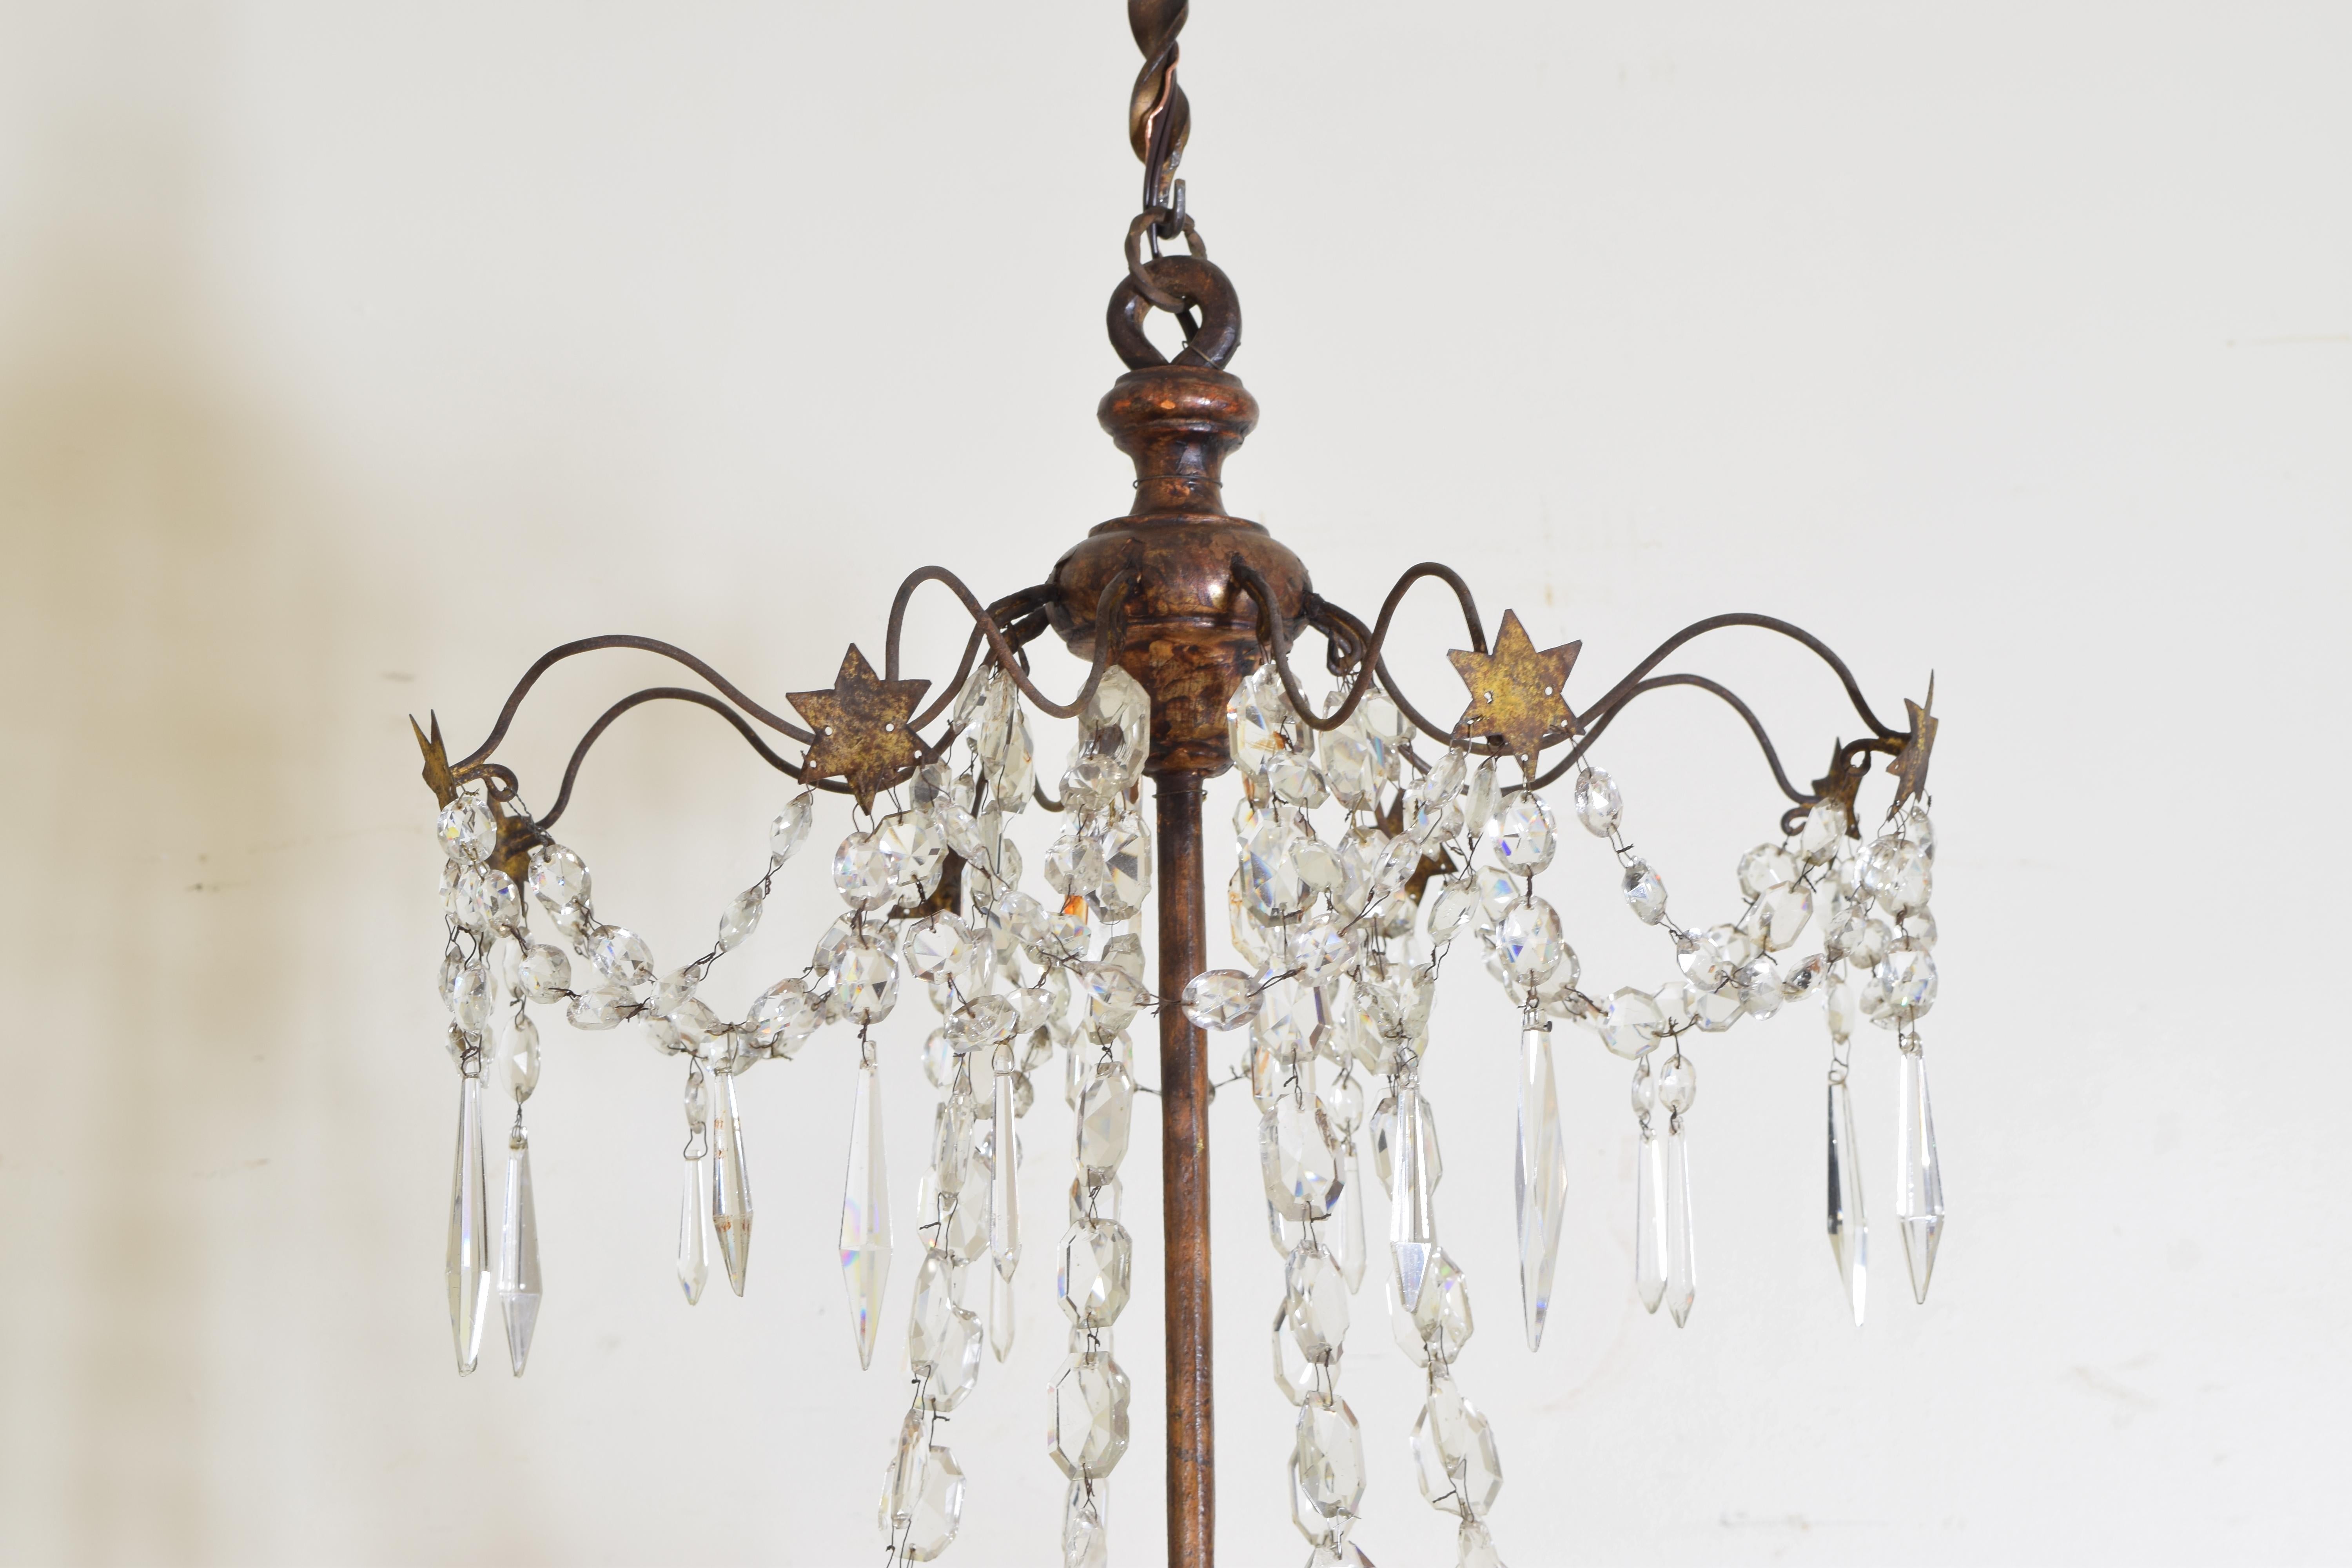 Mid-19th Century Italian Late Neoclassic Giltwood, Iron, and Glass 8-Light Chandelier, circa 1835